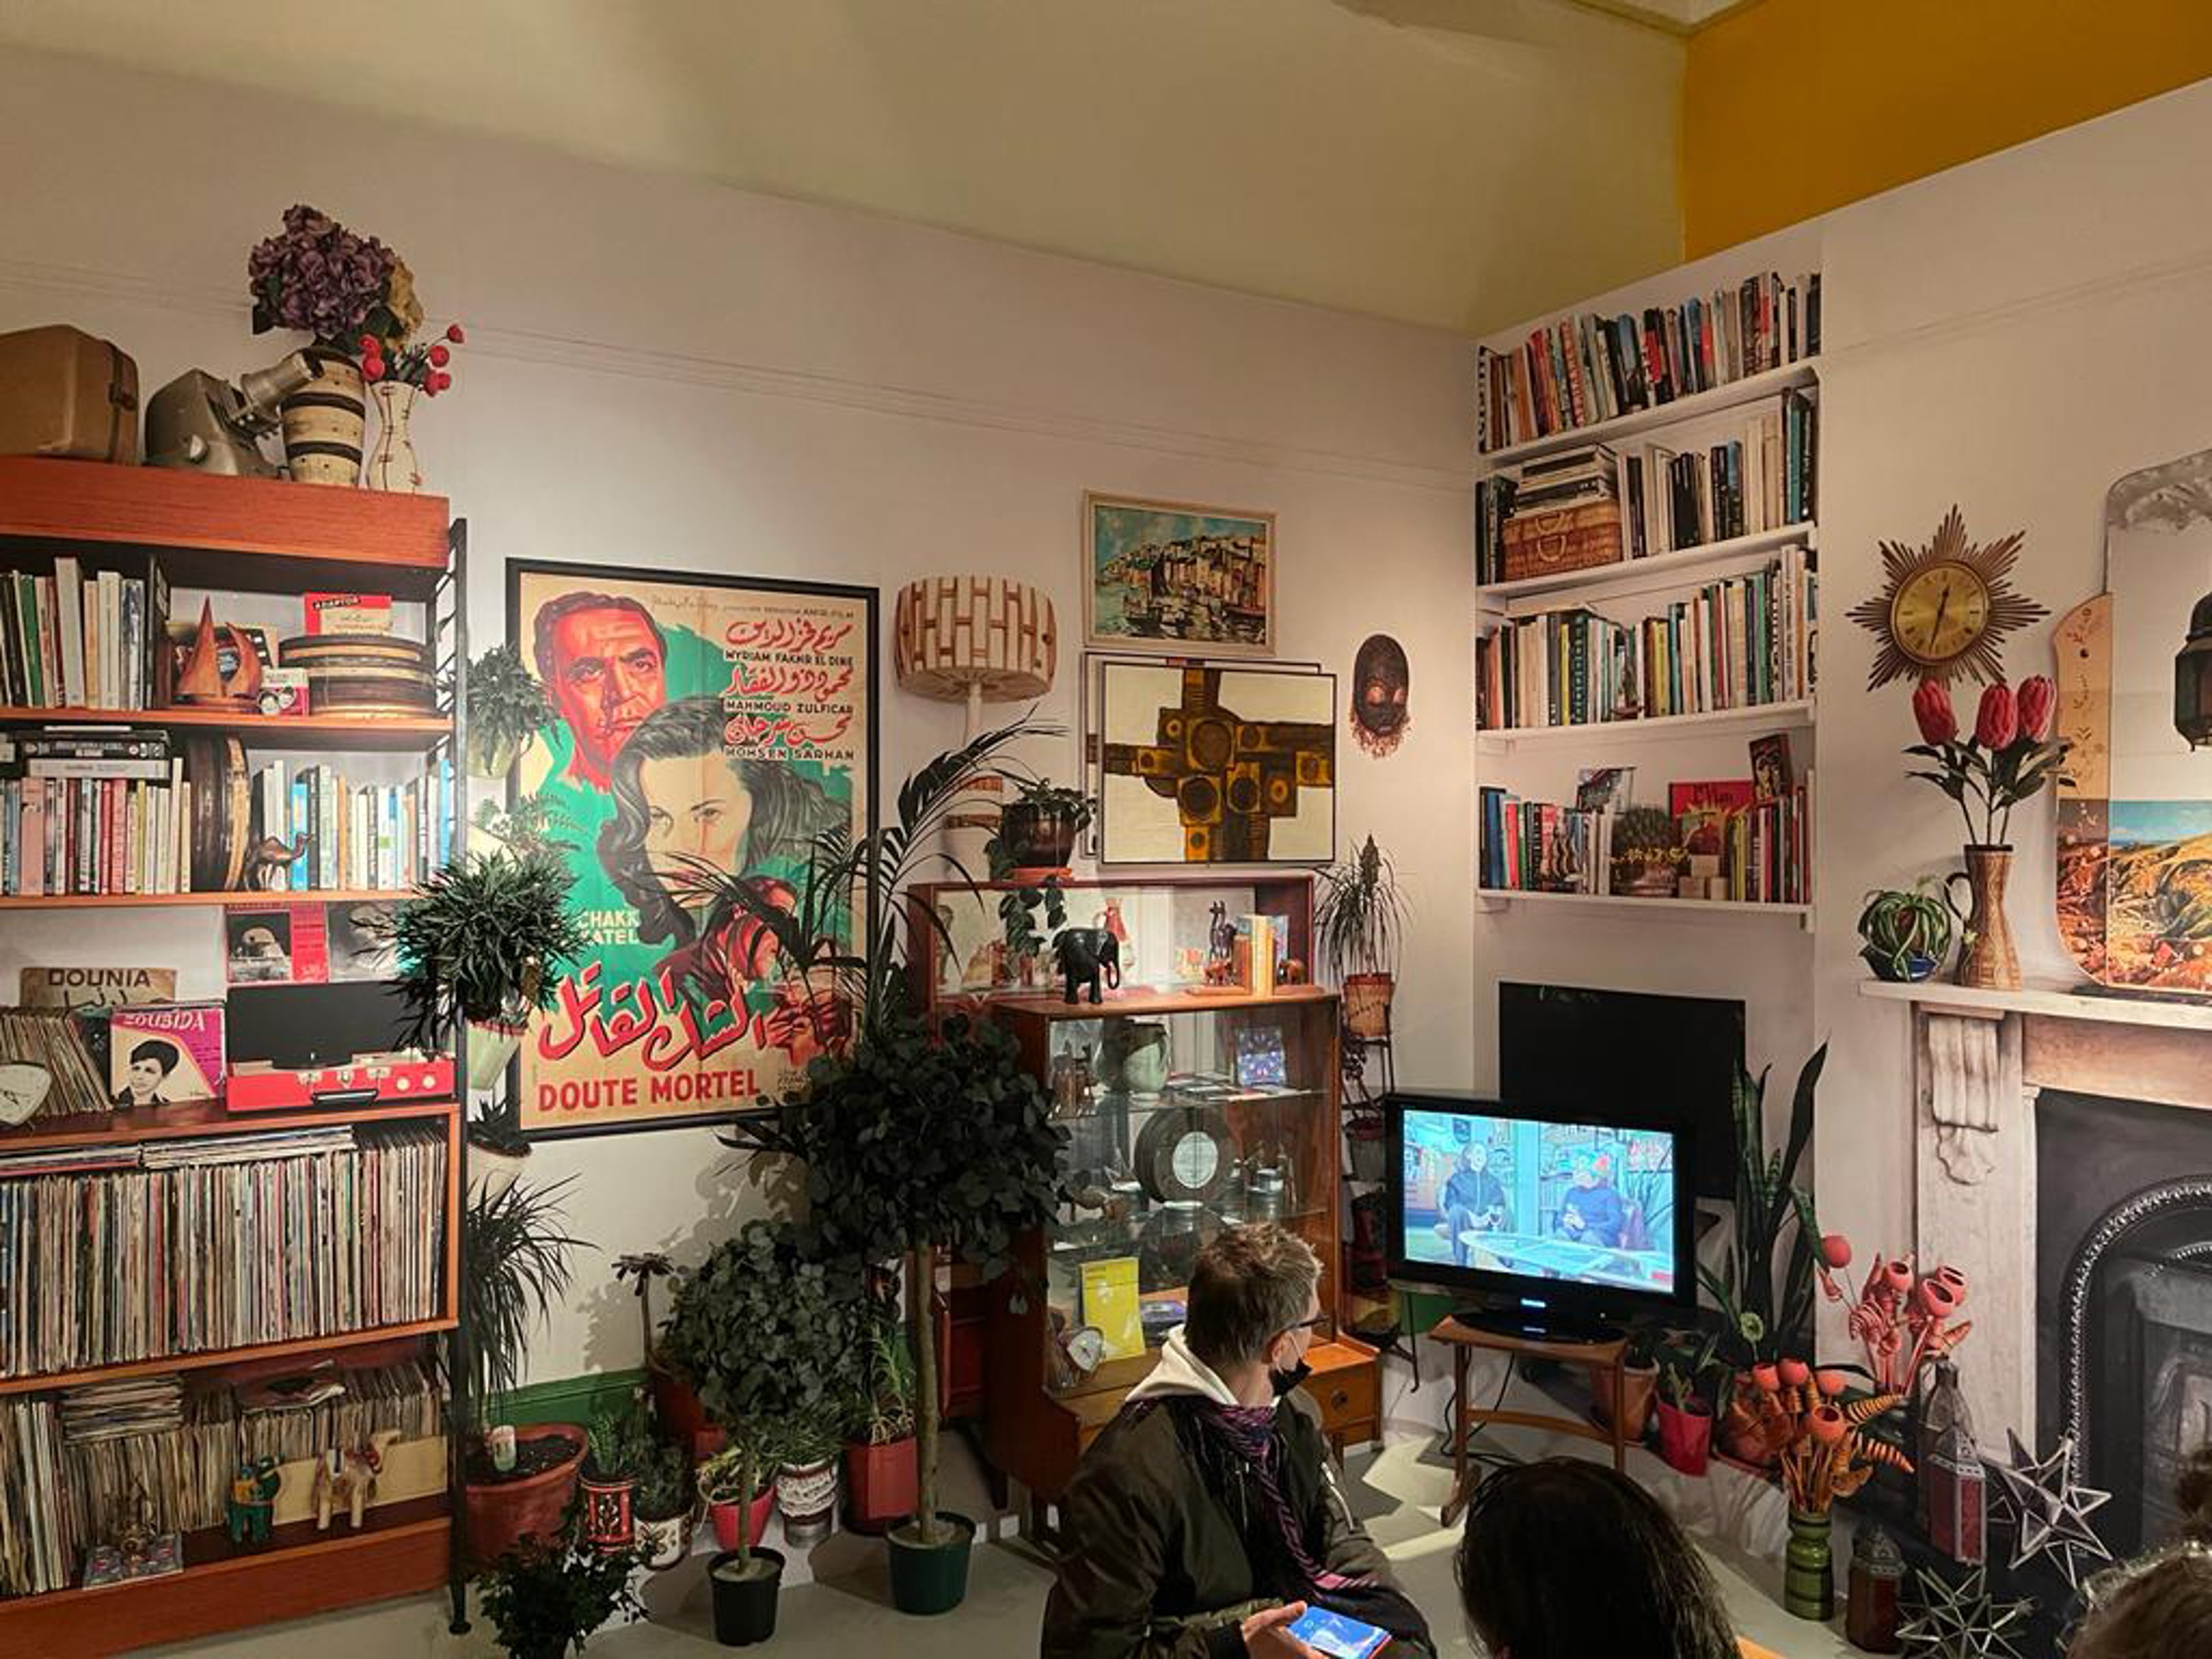 A person sitting on the floor looking at the TV over their shoulder in a room filled with books, paintings, and ornaments in yellow tones.